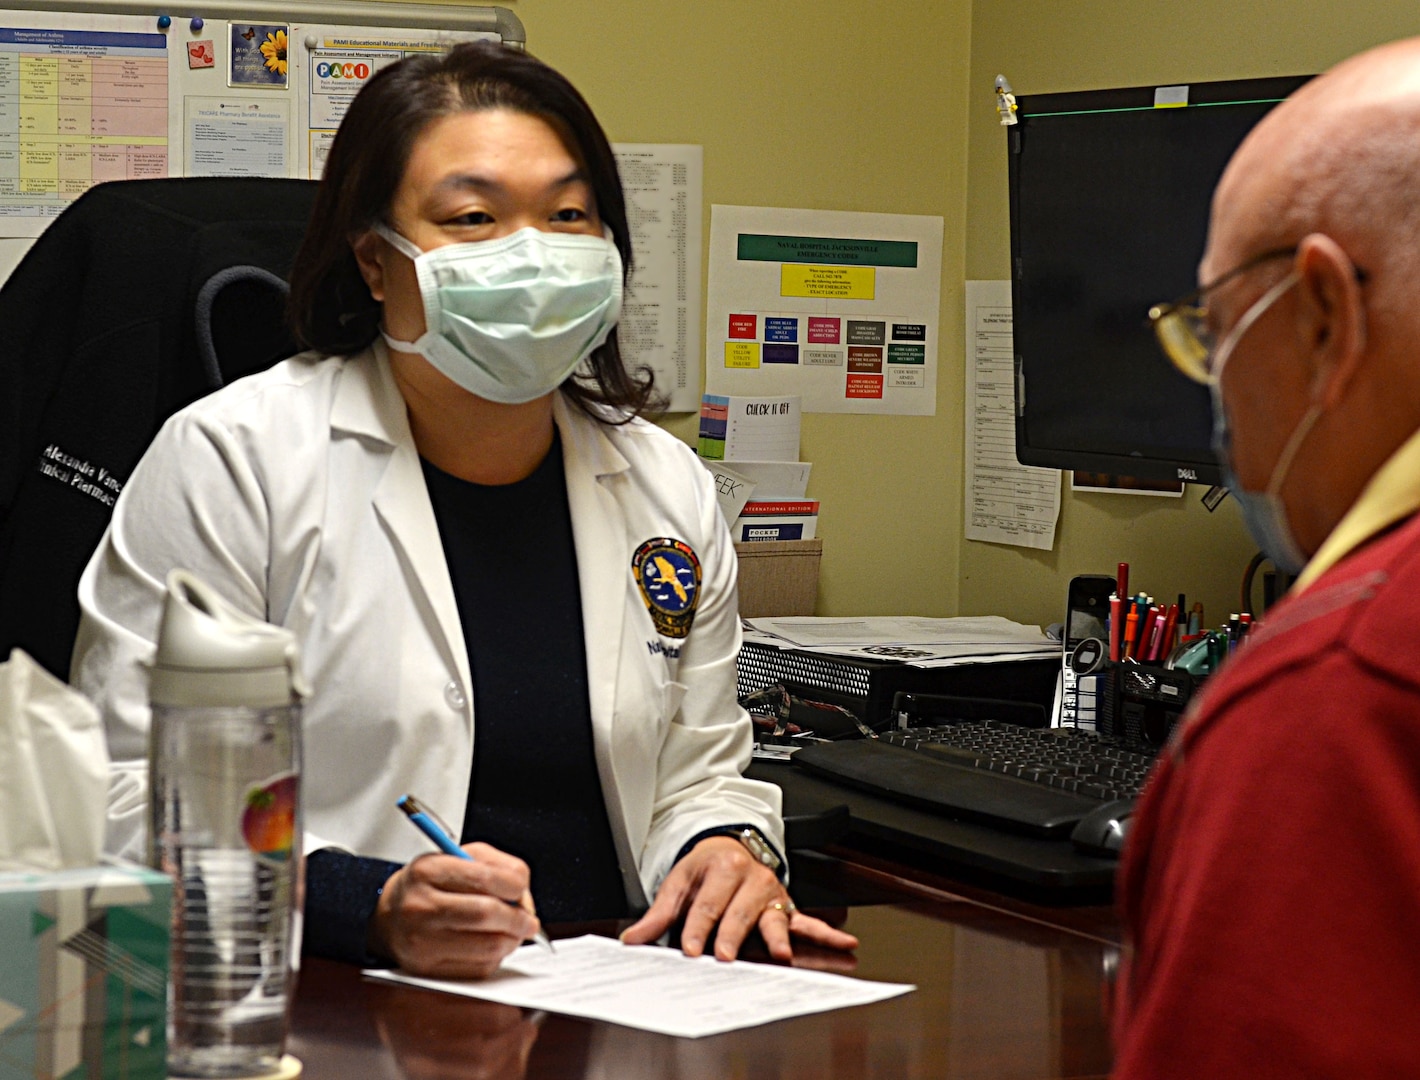 Alexandra Vance, Naval Hospital Jacksonville�s clinical pharmacy coordinator, conducts a medication review with a patient.